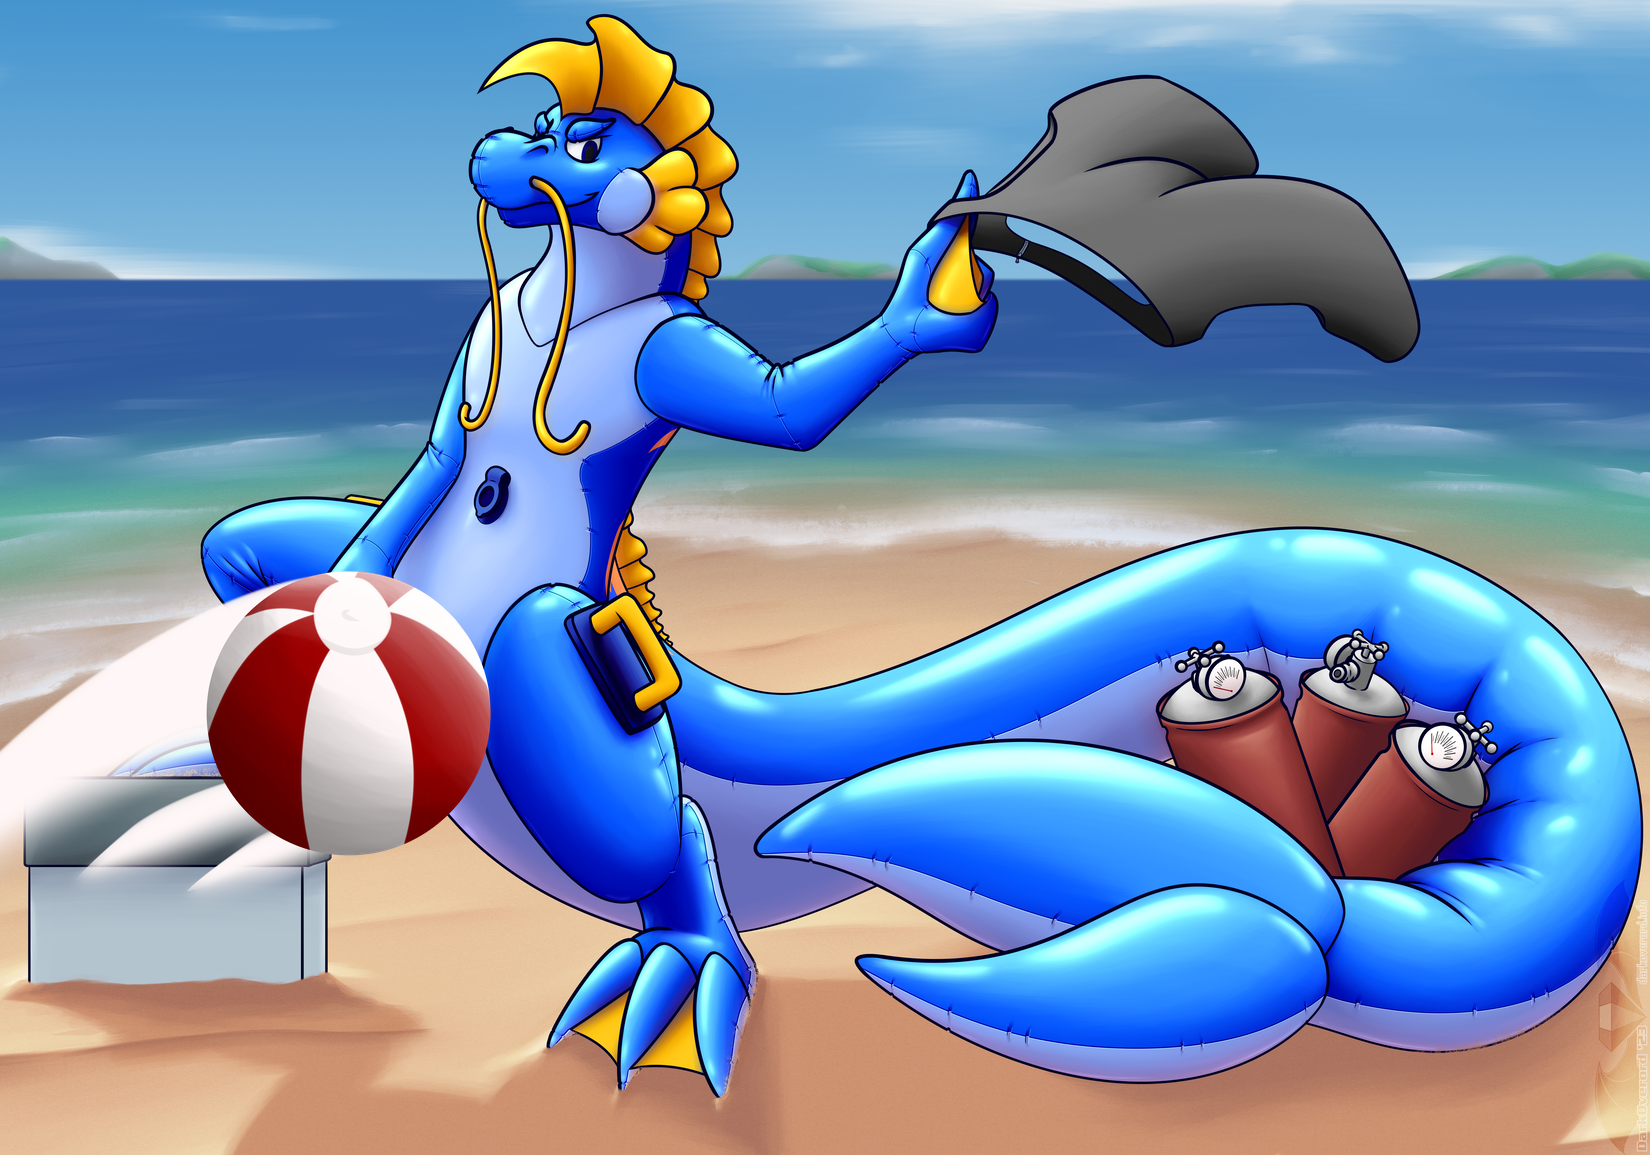 An anthro blue eastern dragon (Rigel) looking mischievously at the viewer and is swinging his shorts on a finger, he's partly obscured by a random beach ball bouncing in front of his legs.